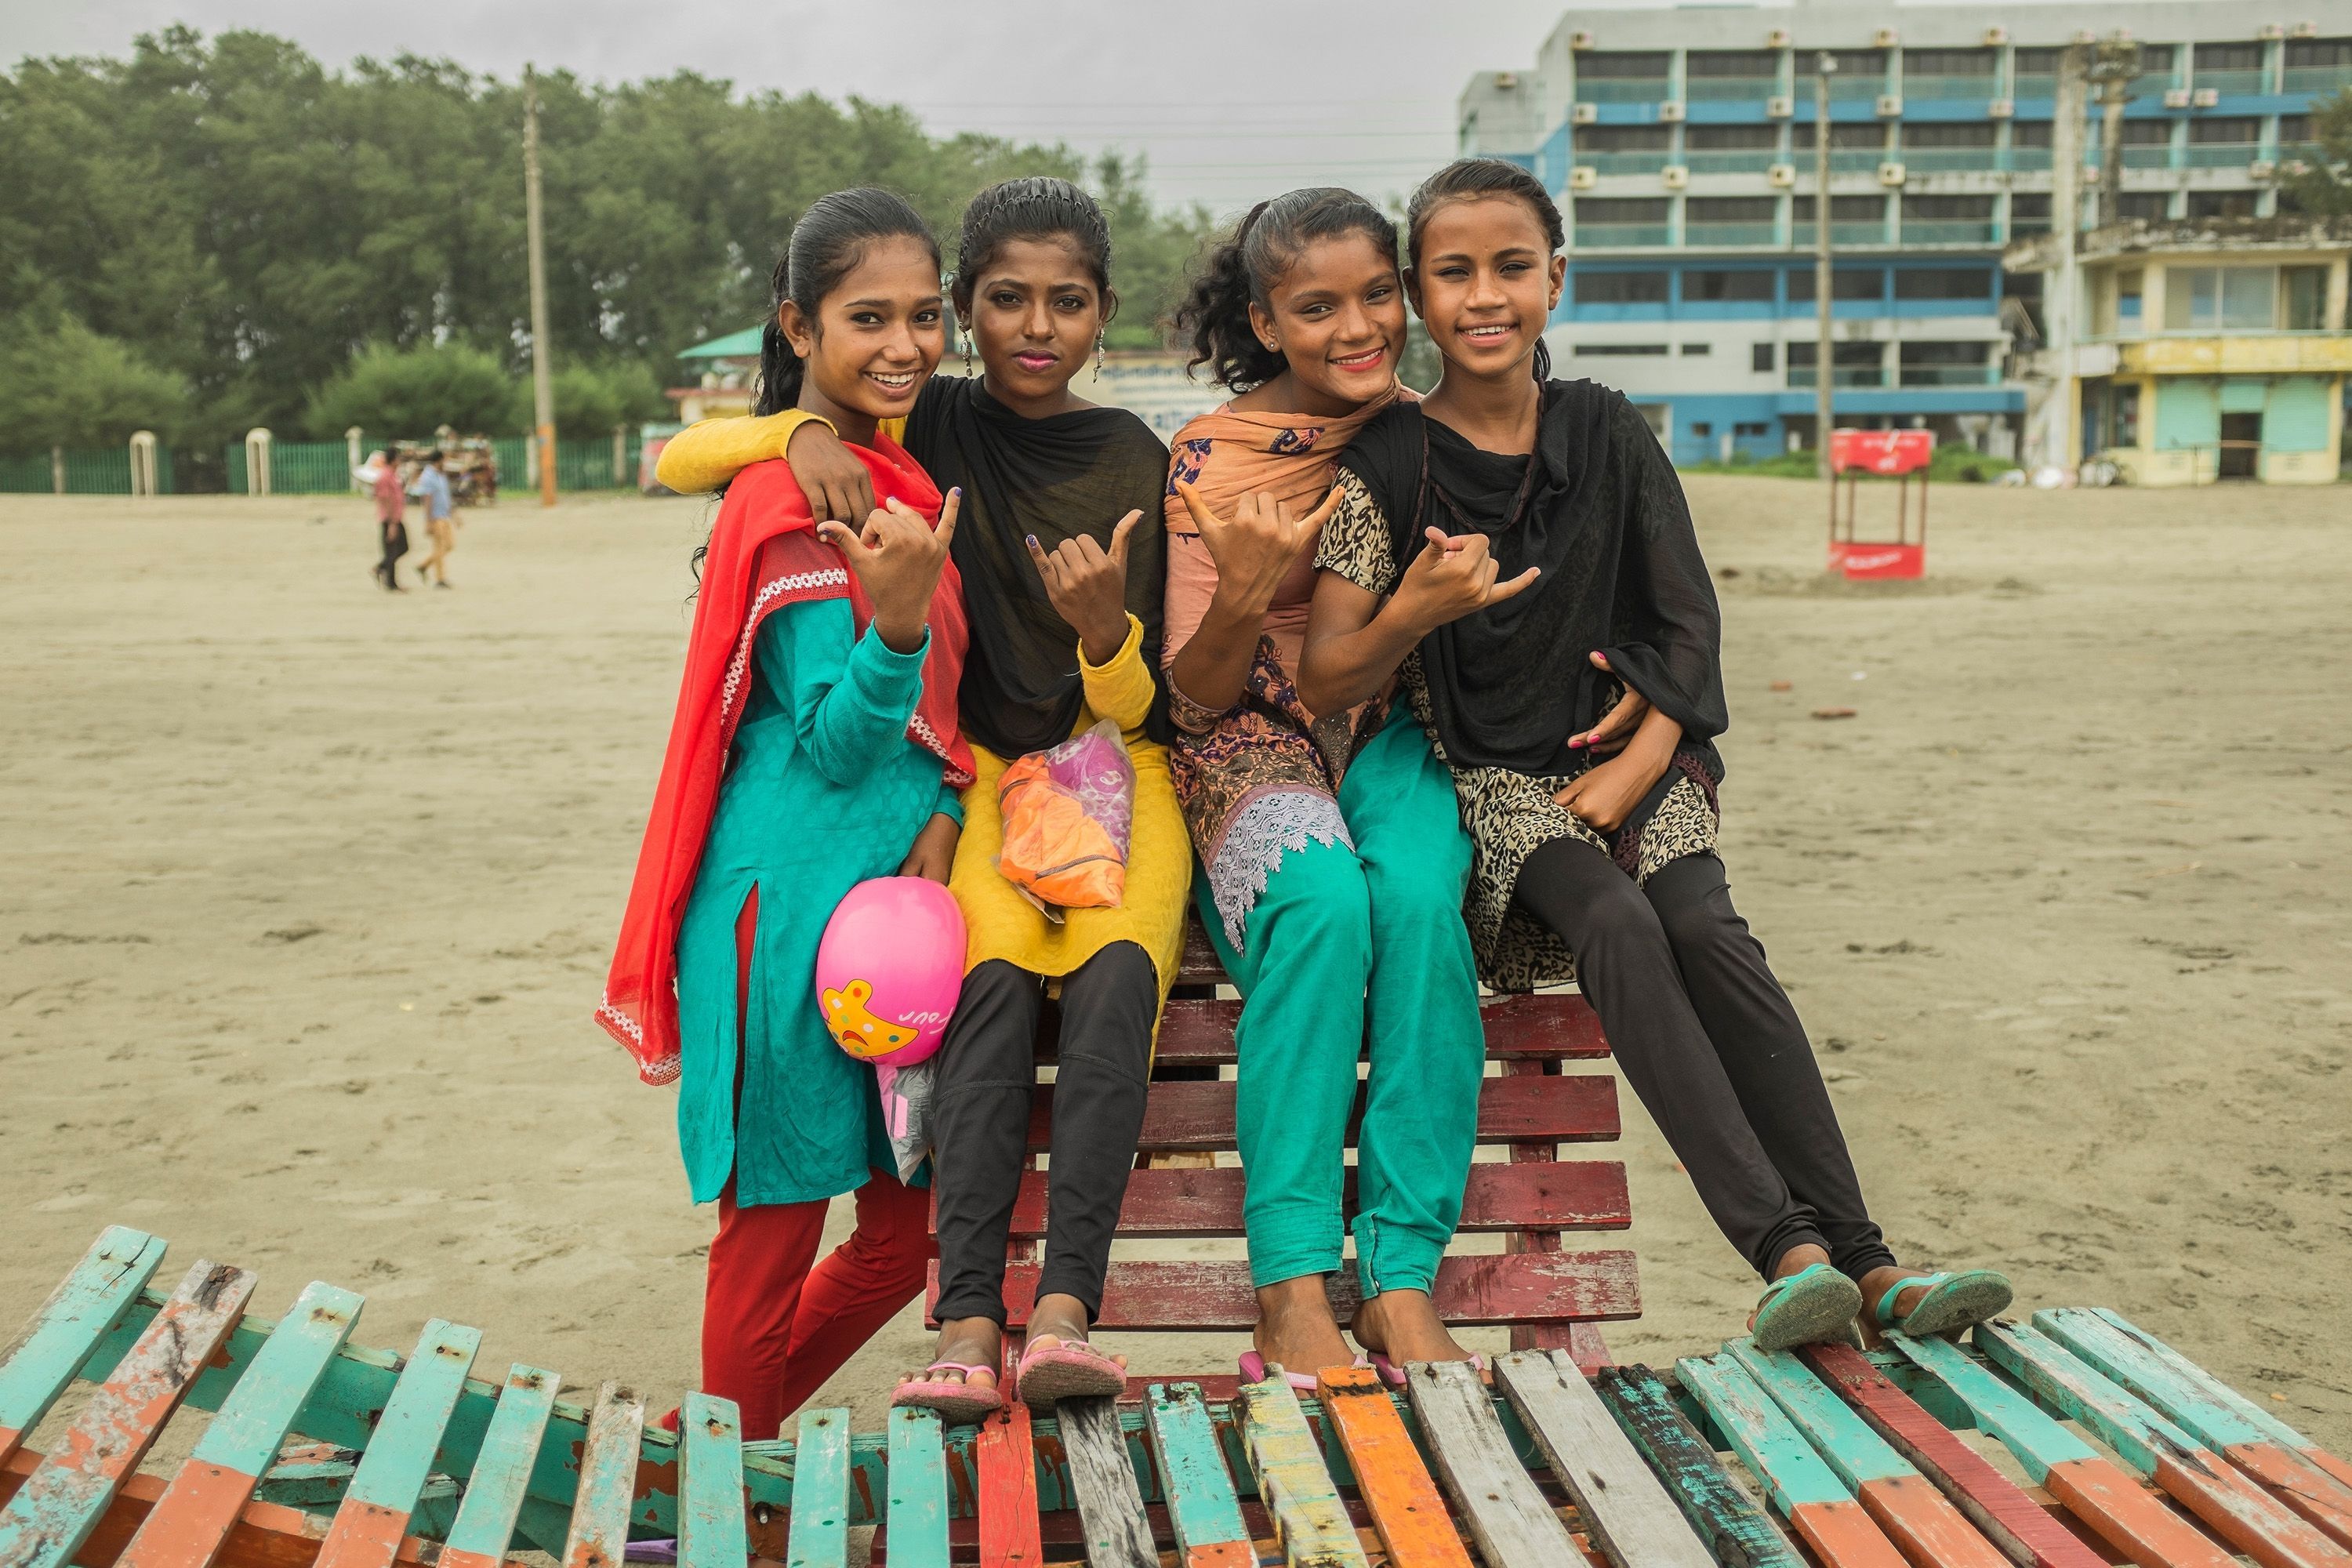 Suma and other girls from the club flash the classic "hang loose" sign. Image by Giulio Paletta. Bangladesh, 2017.